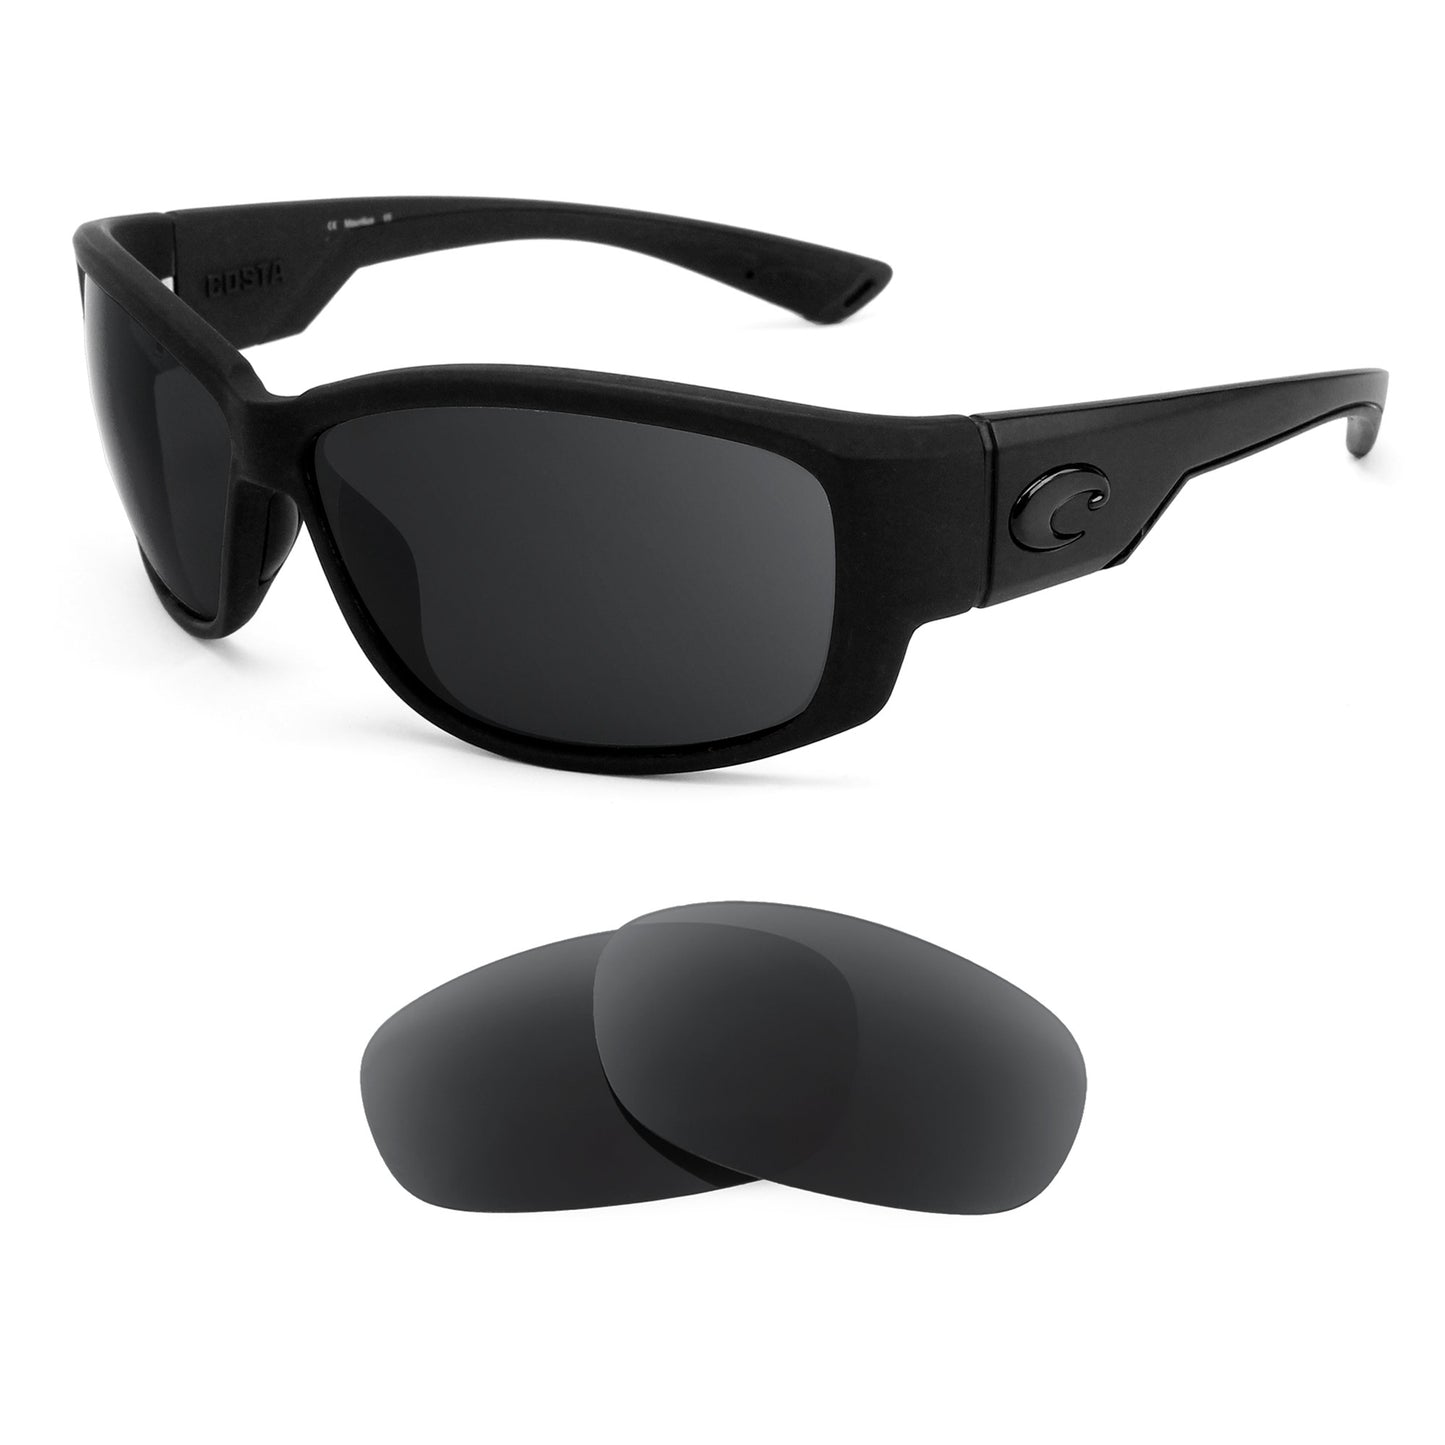 Costa Luke sunglasses with replacement lenses